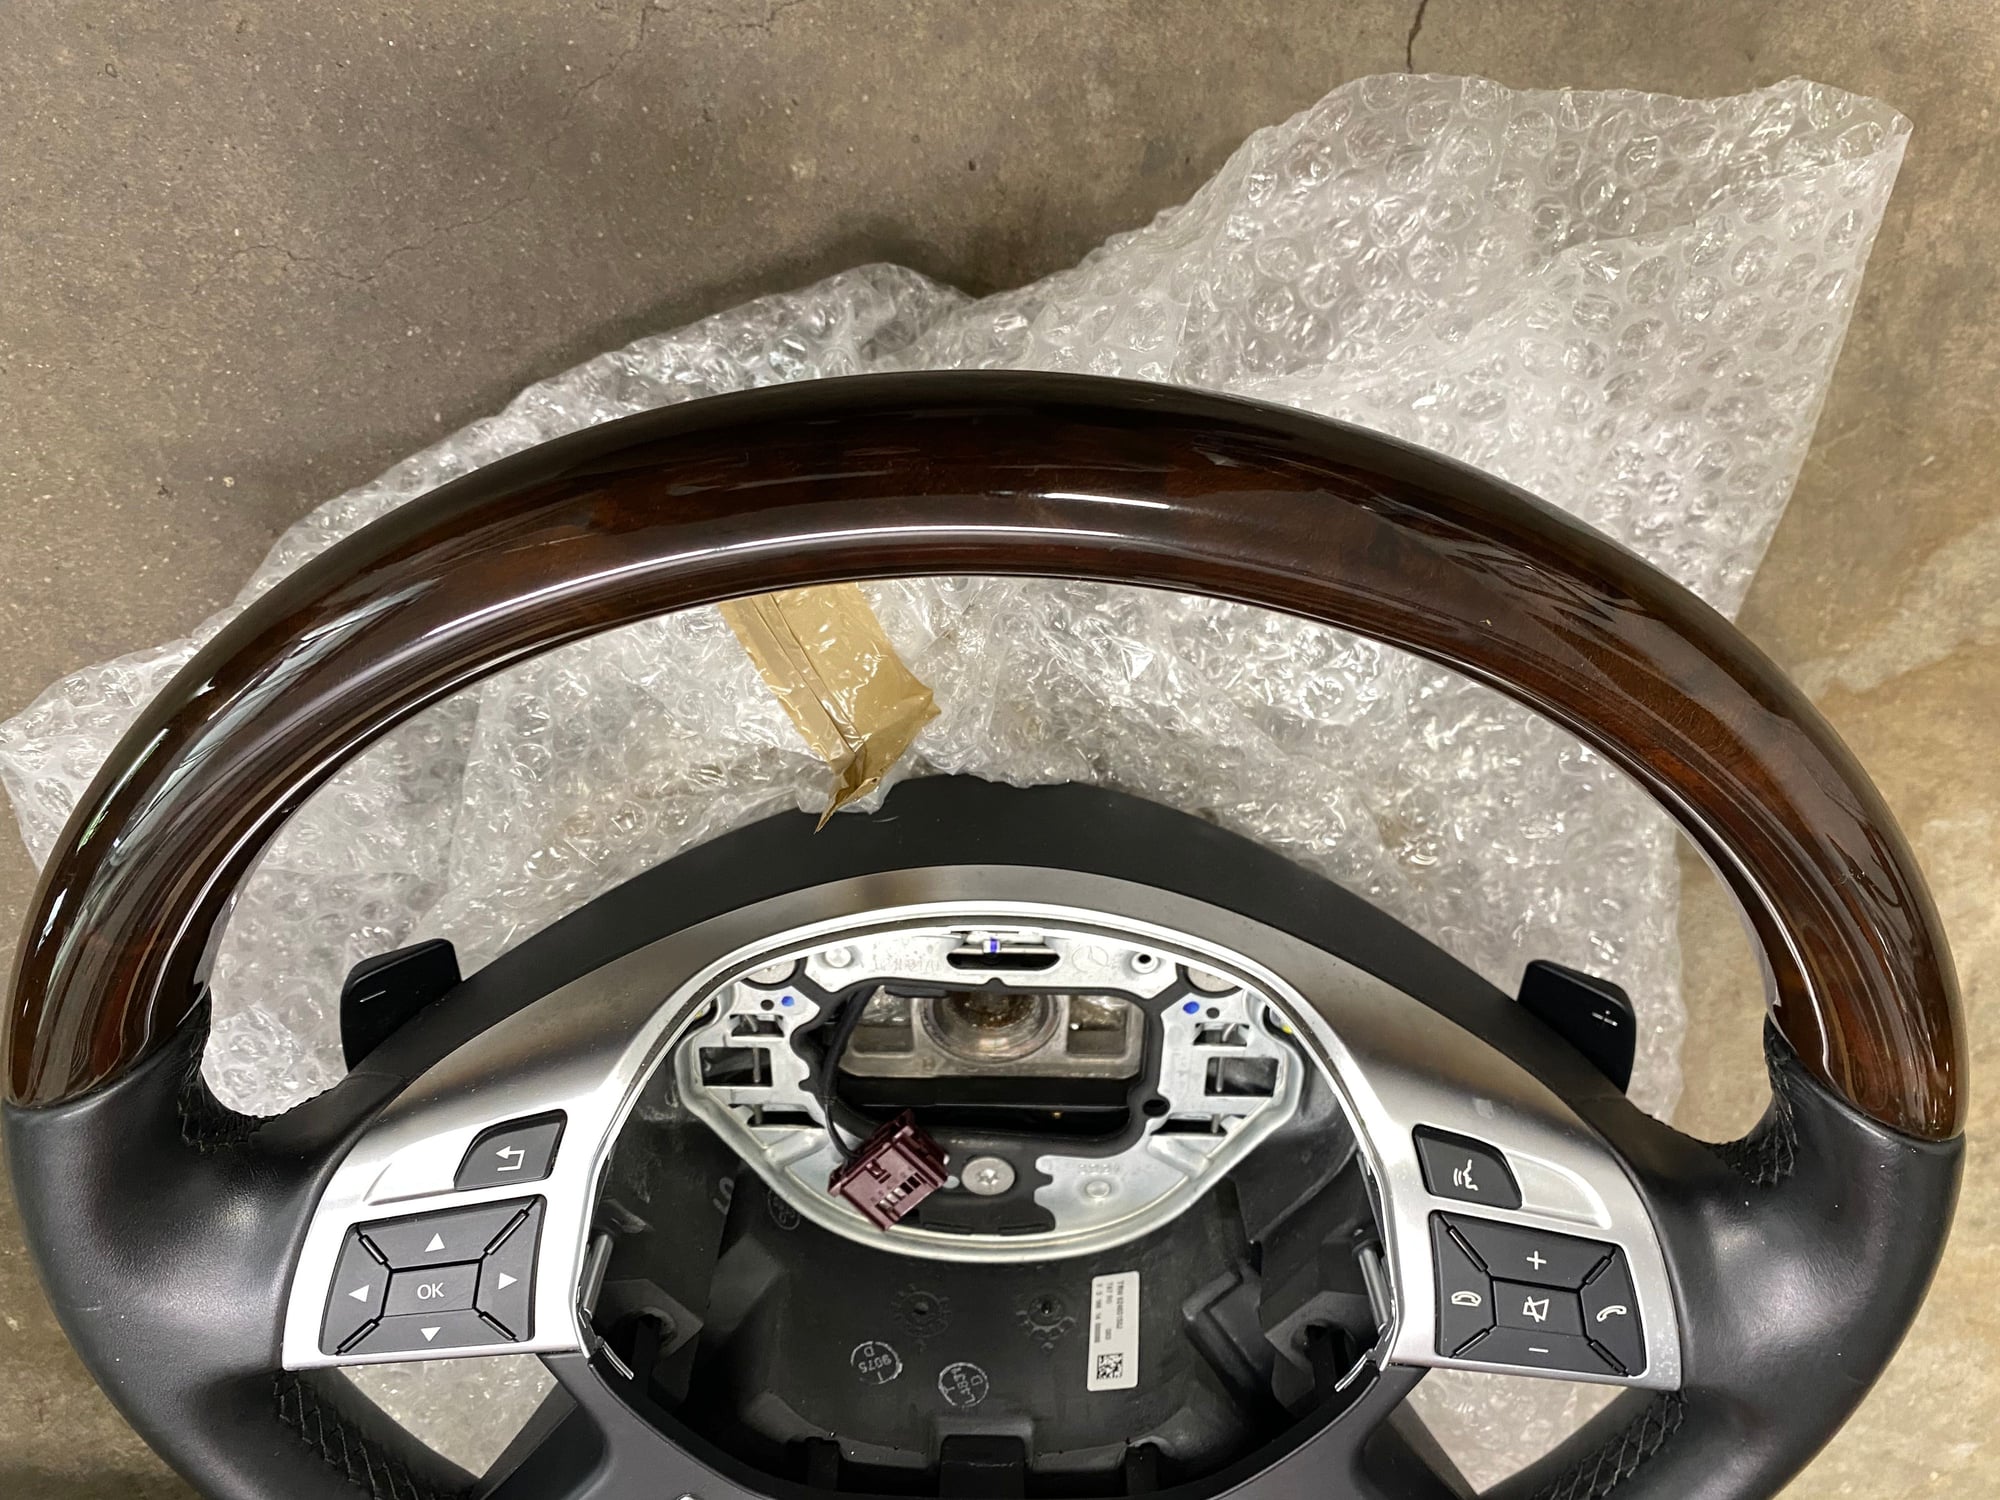 Interior/Upholstery - 166 steering wheel black leather and wood 12-16' - Used - 2012 to 2016 Mercedes-Benz GL550 - Lake Wylie, SC 29710, United States